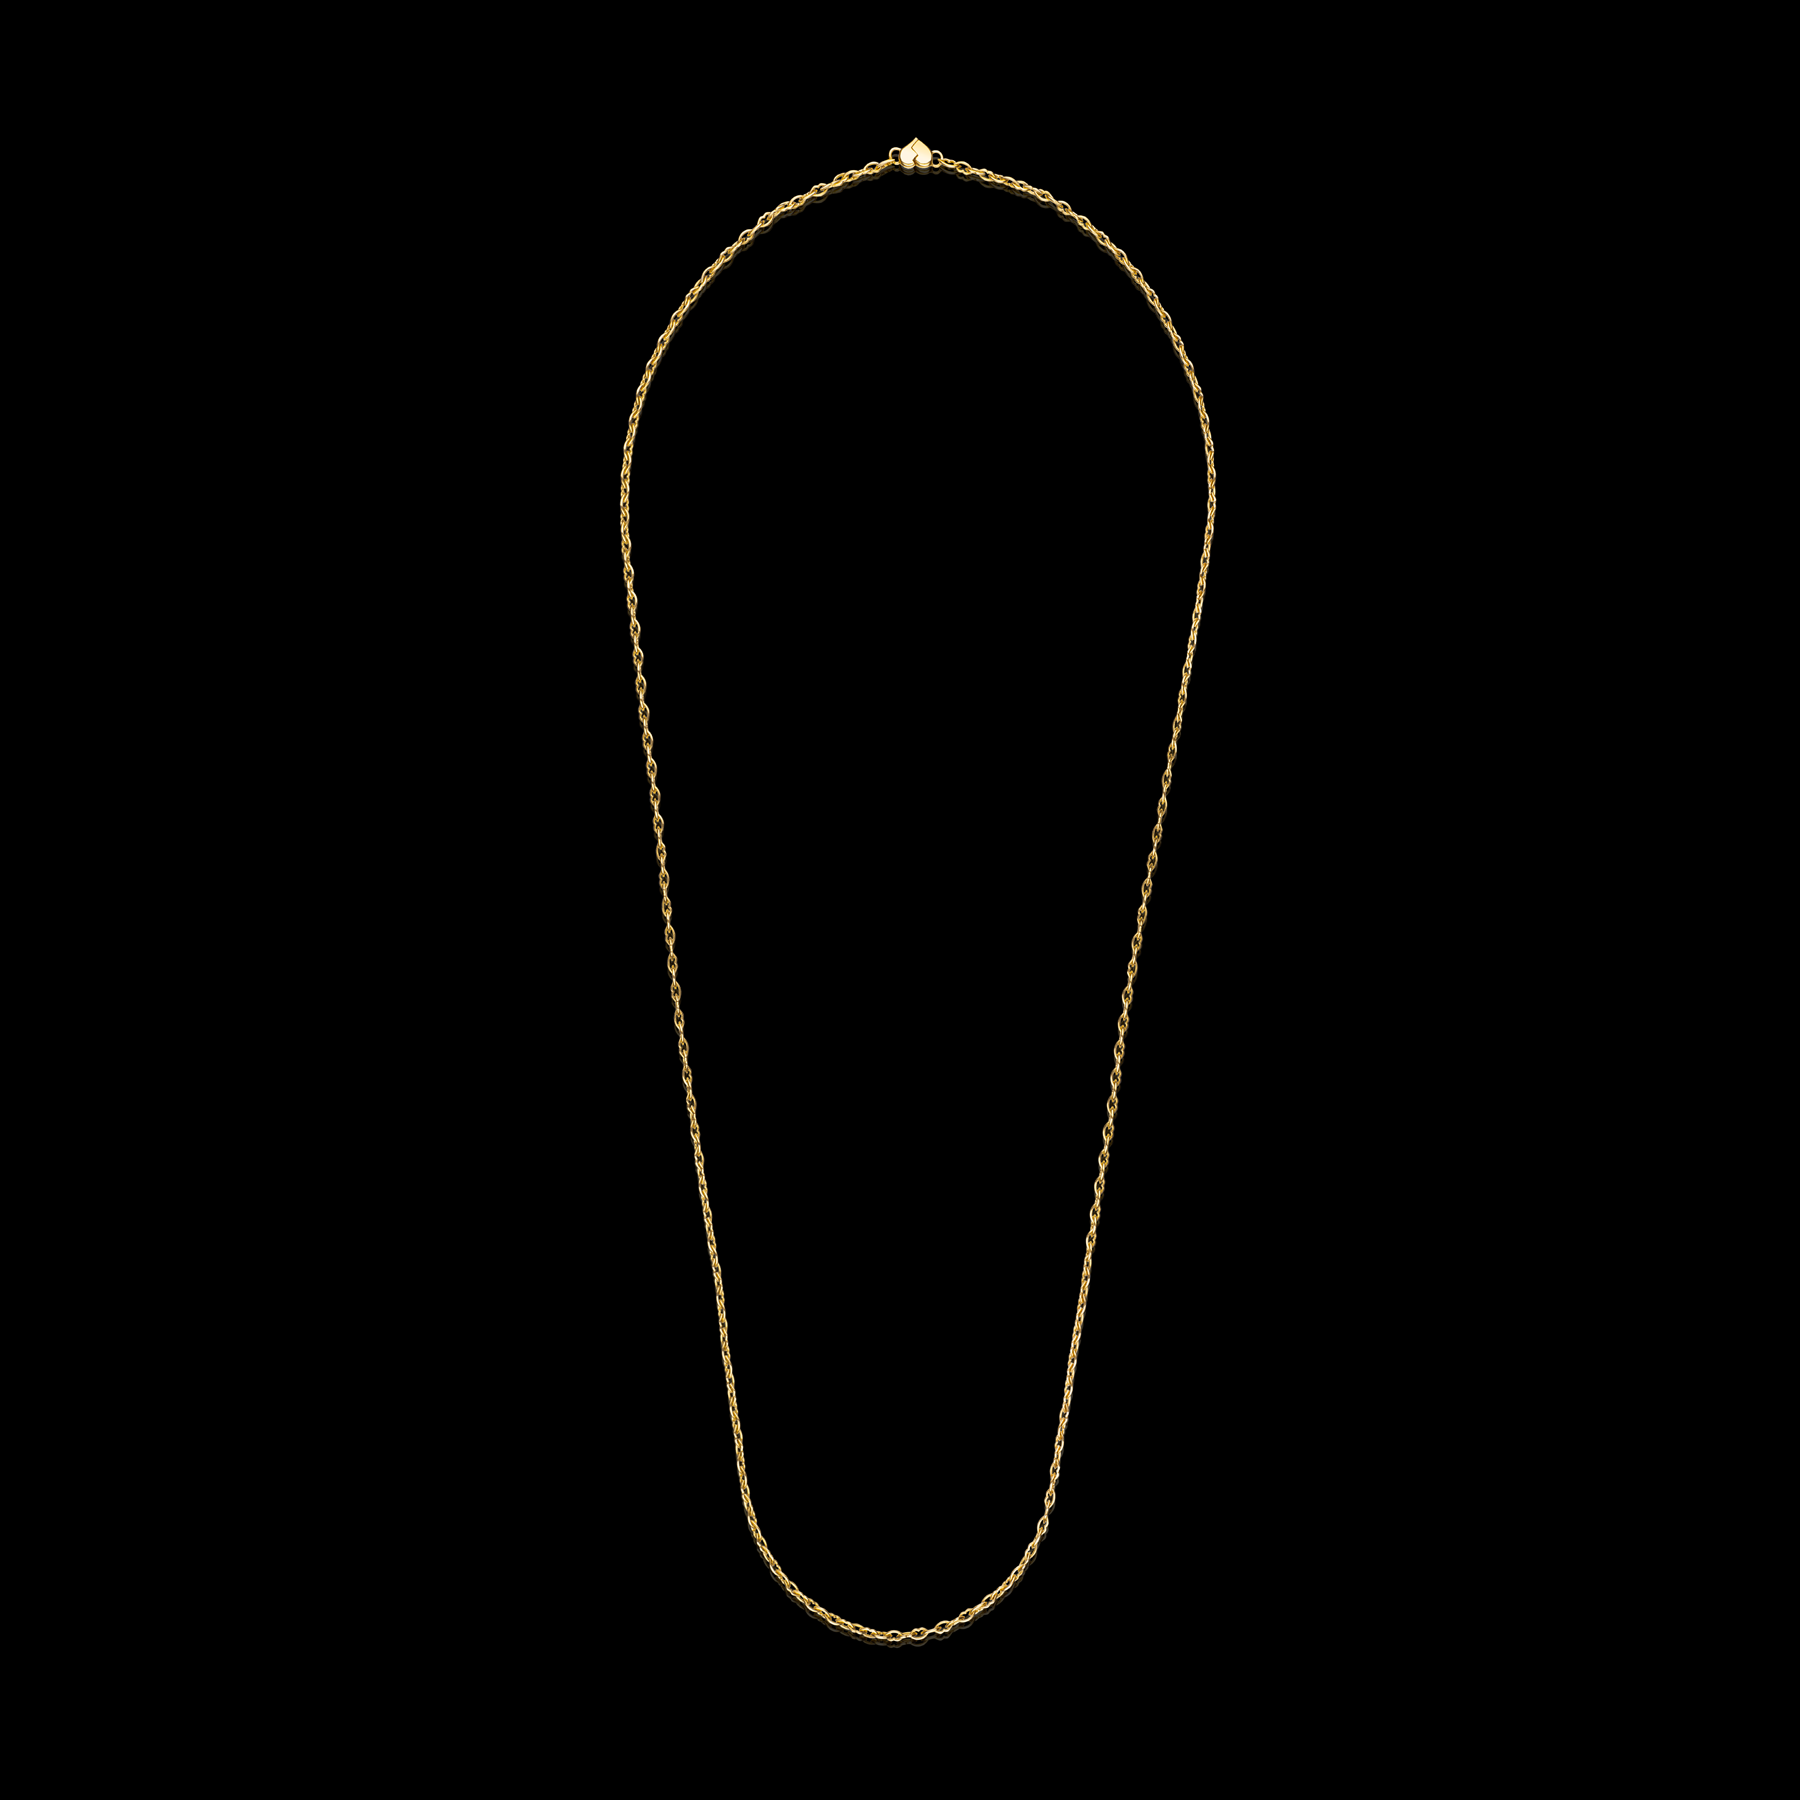 The Love and Kisses chain long necklace by designer Solange Azagury-Partridge - 18 carat Yellow Gold - front flat view